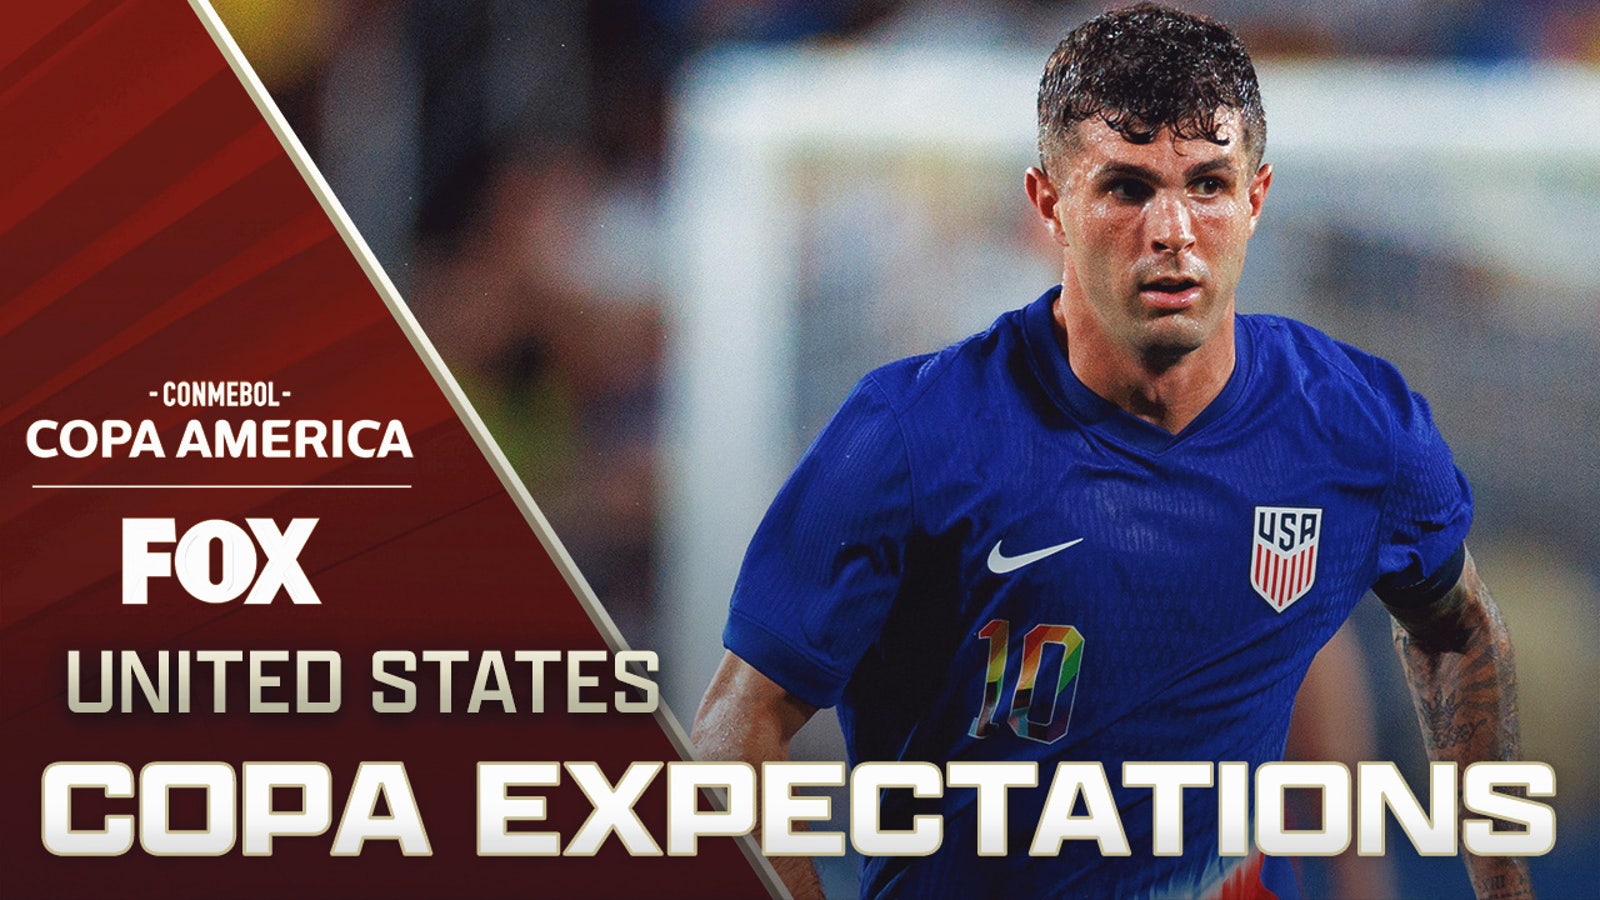 USMNT's Copa América expectations and if they will exceed them  | Euro Today